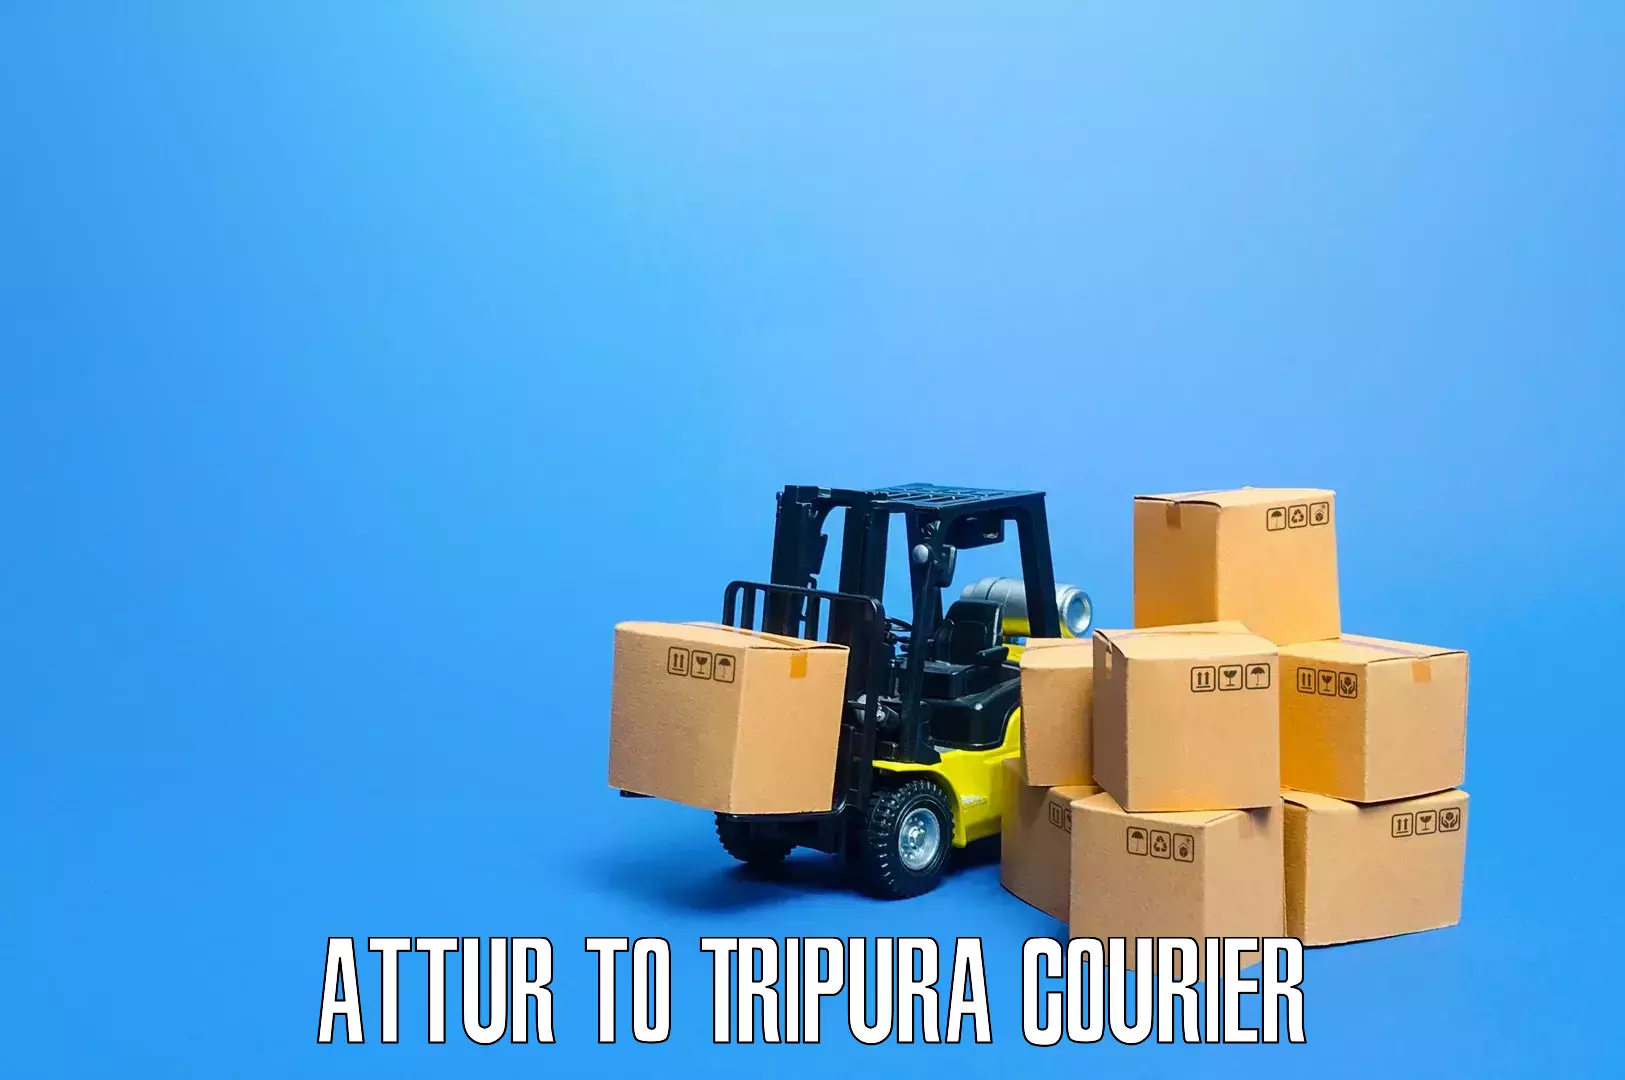 Efficient packing and moving Attur to Tripura